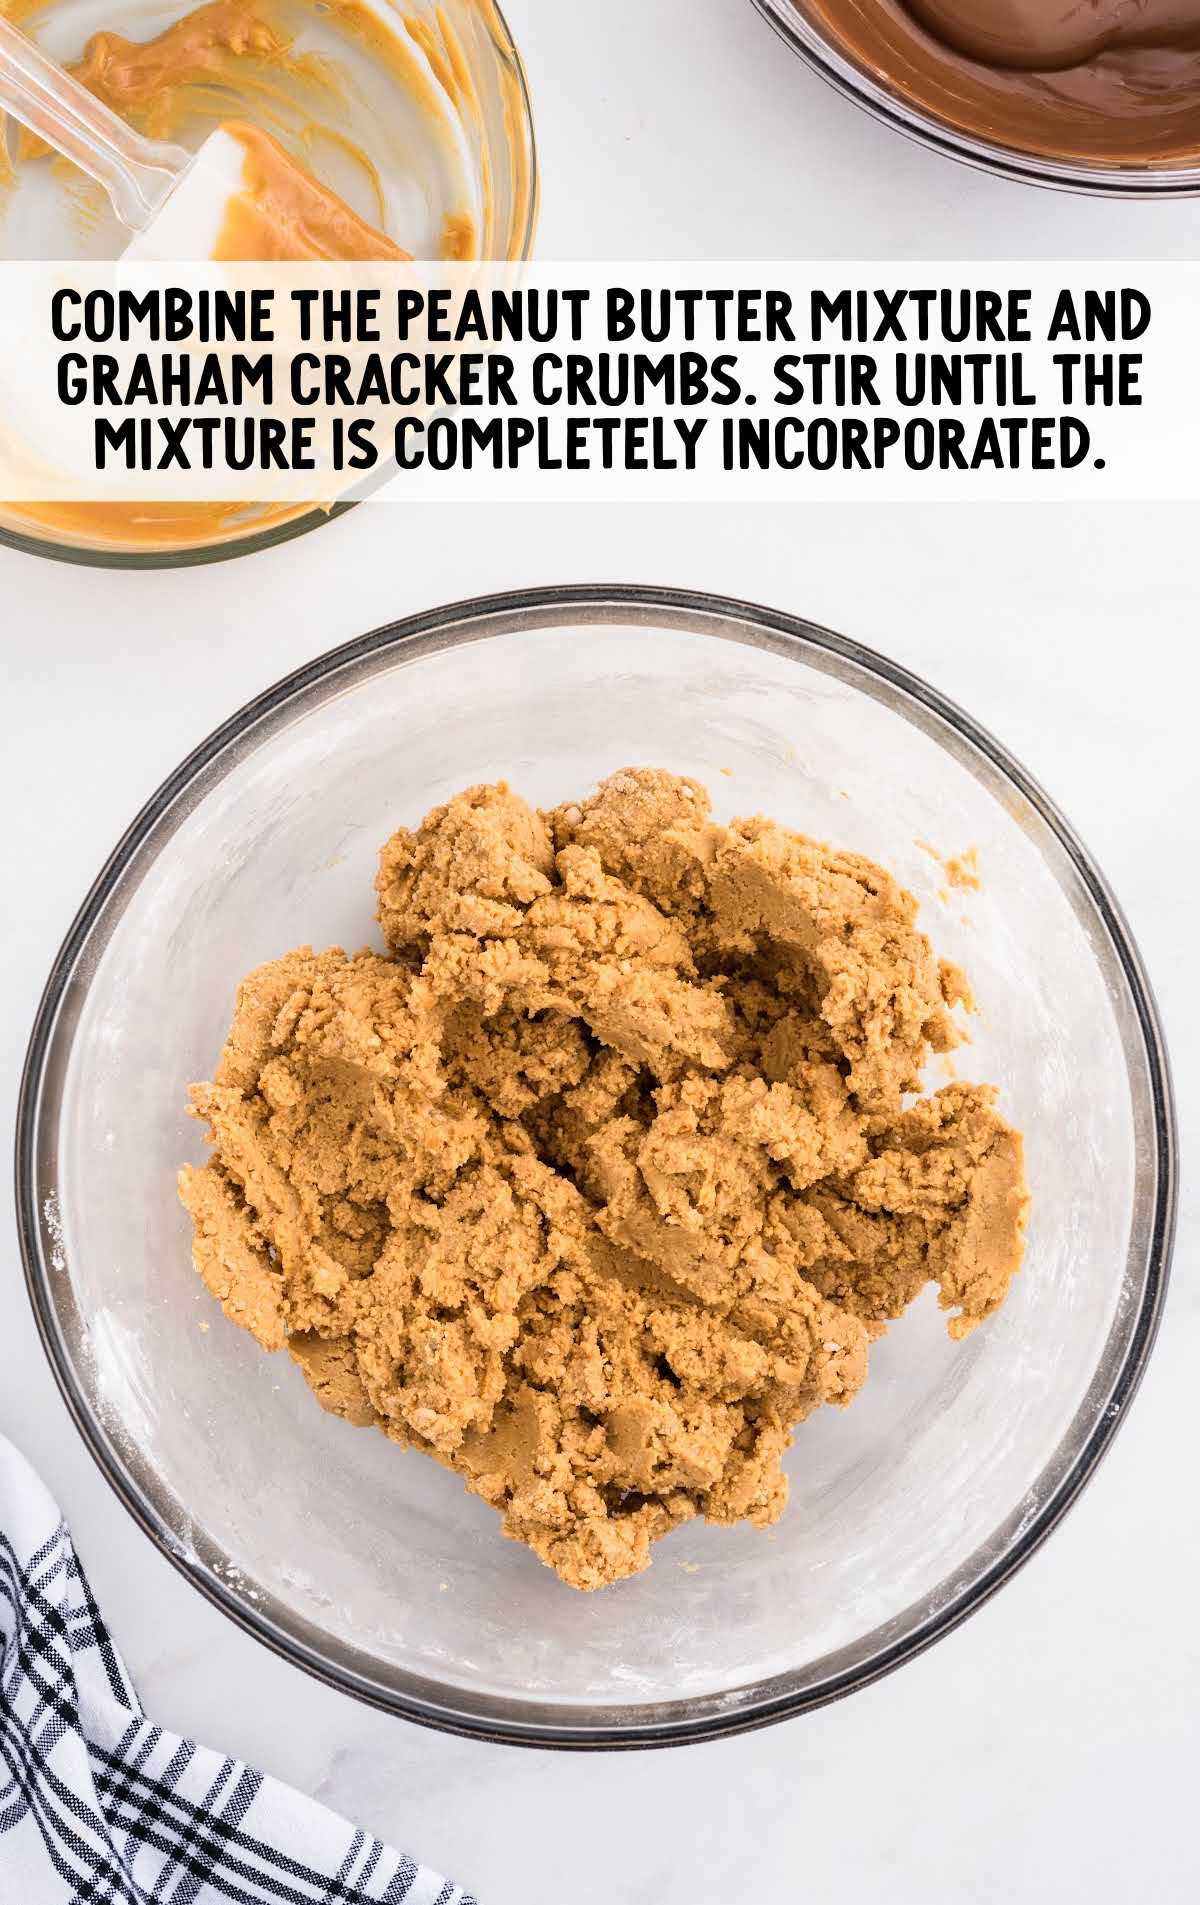 peanut butter mixture and graham cracker crumbs combined in a bowl